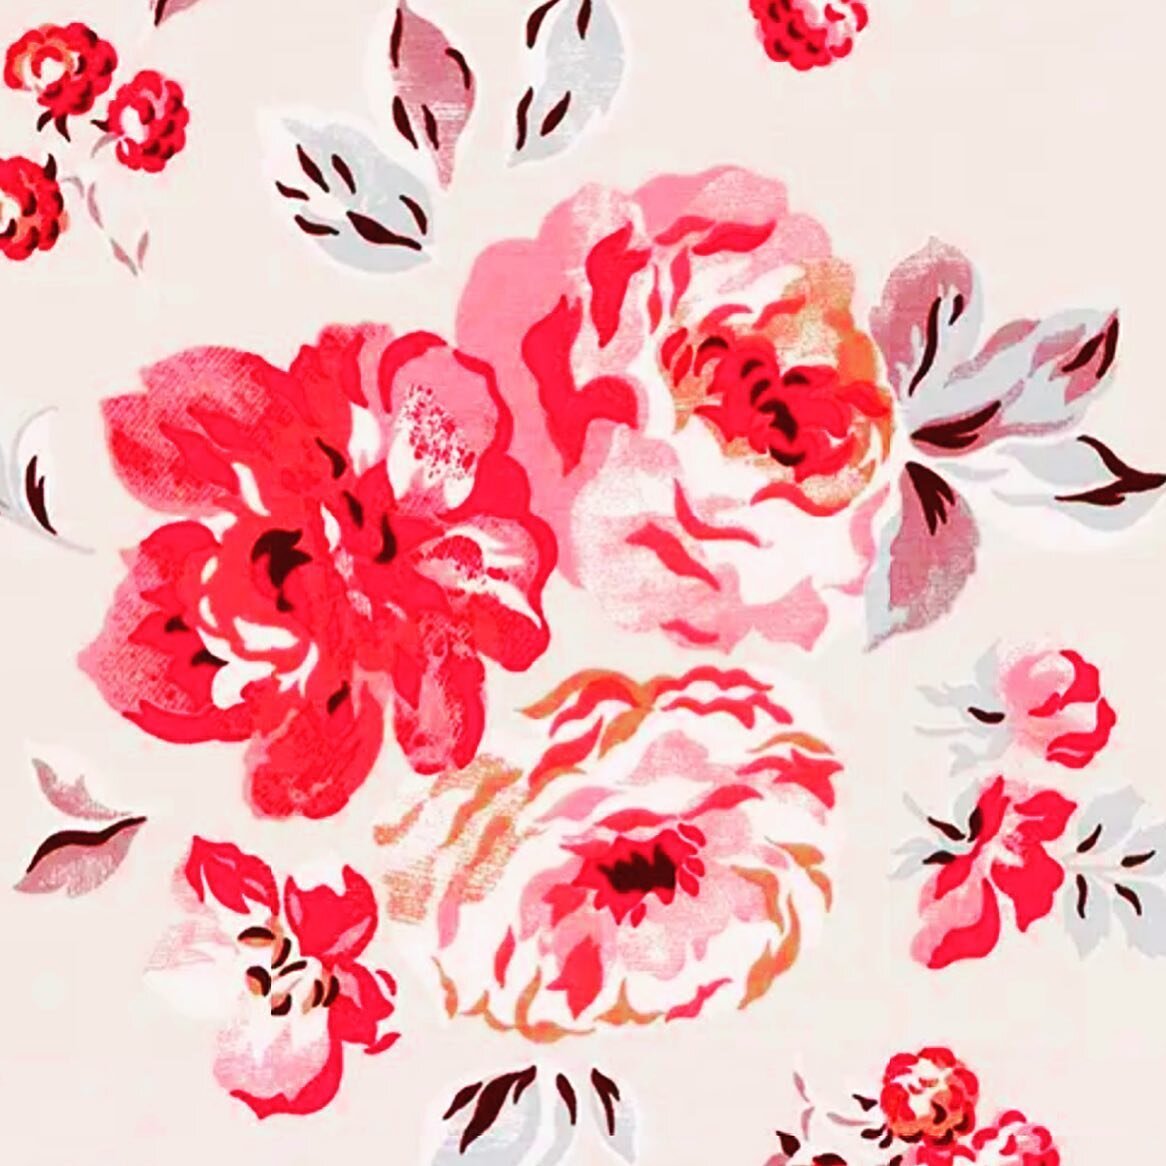 🌸Hooray! Cheery
@cathkidston fabric is back&mdash;a look alike to our client&rsquo;s gorgeous roses 🌸(swipe to see the beauties)
. 
#cathkidston #caswellpetal #stoutfabrics #floralfabrics #interiordesign #roses